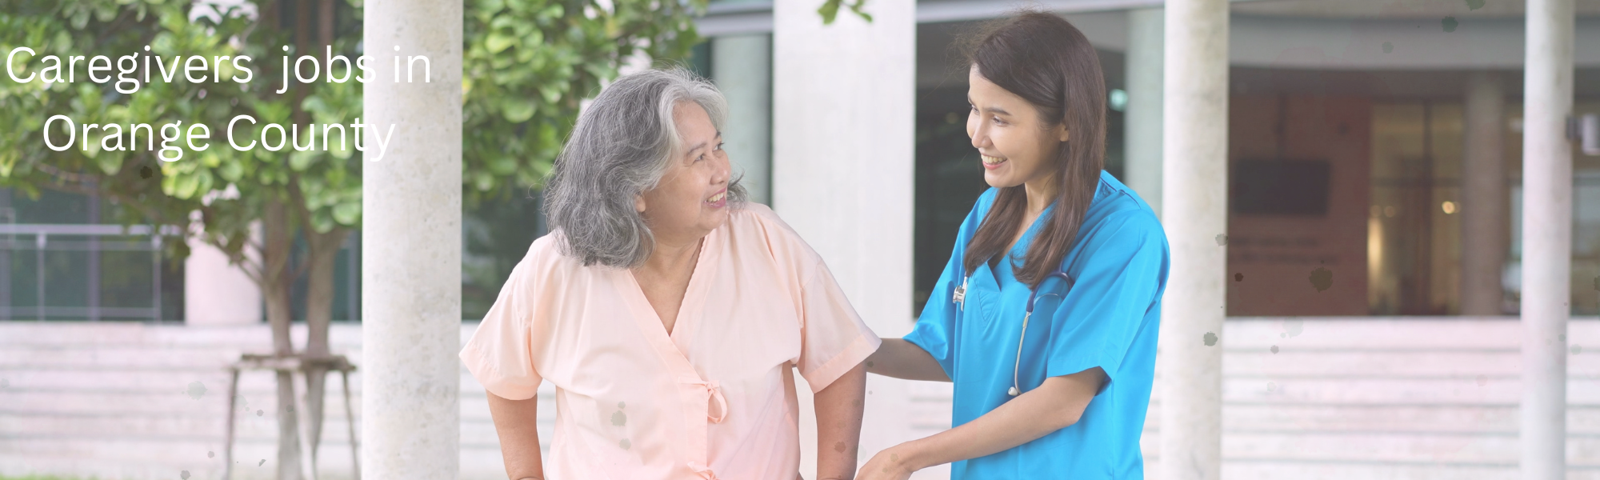 Caregiver Jobs in Orange County: A Fulfilling Career Choice